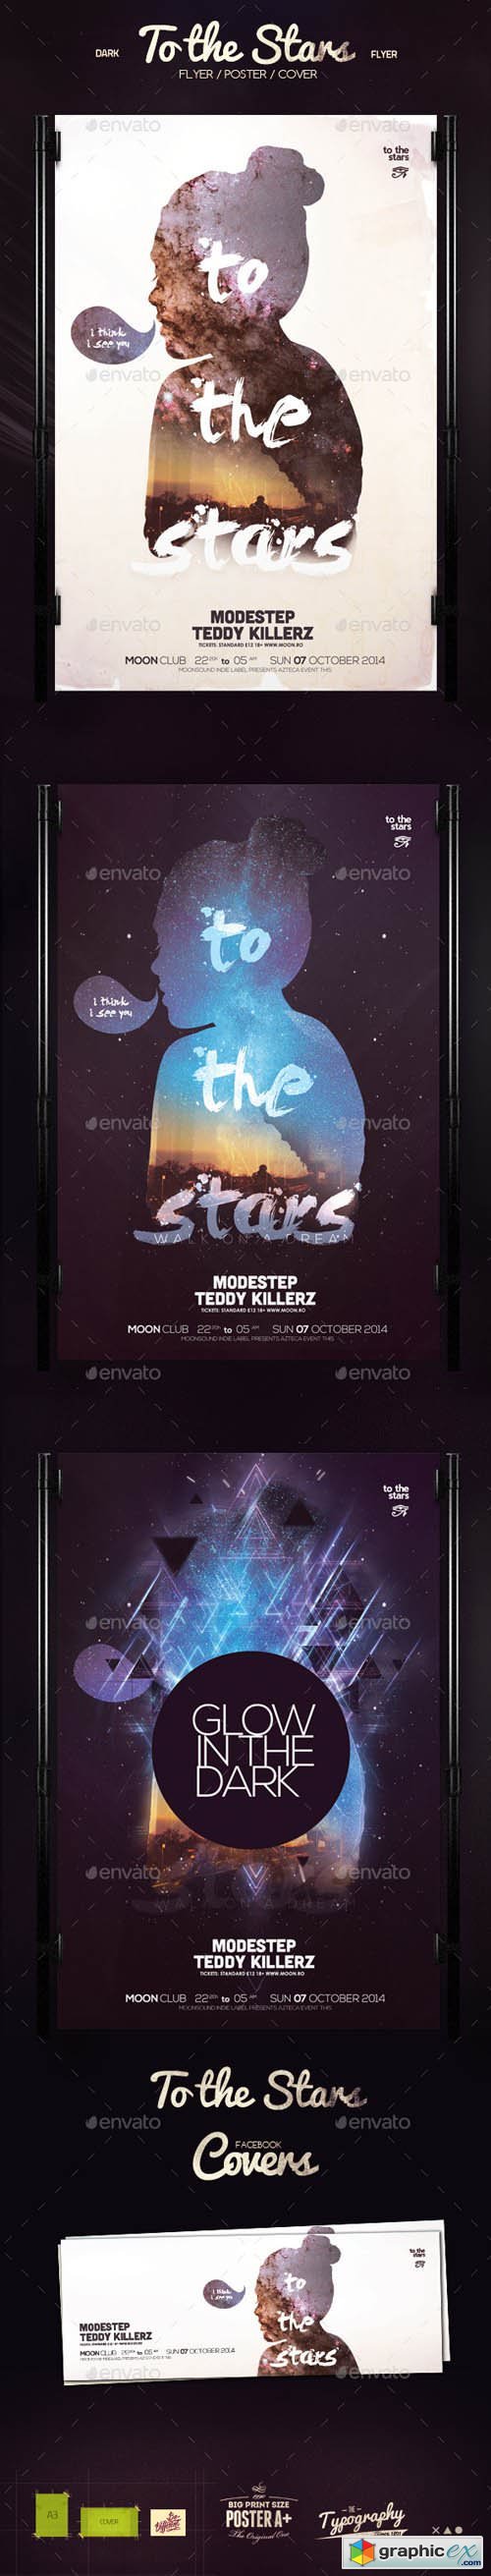 To the Stars Poster